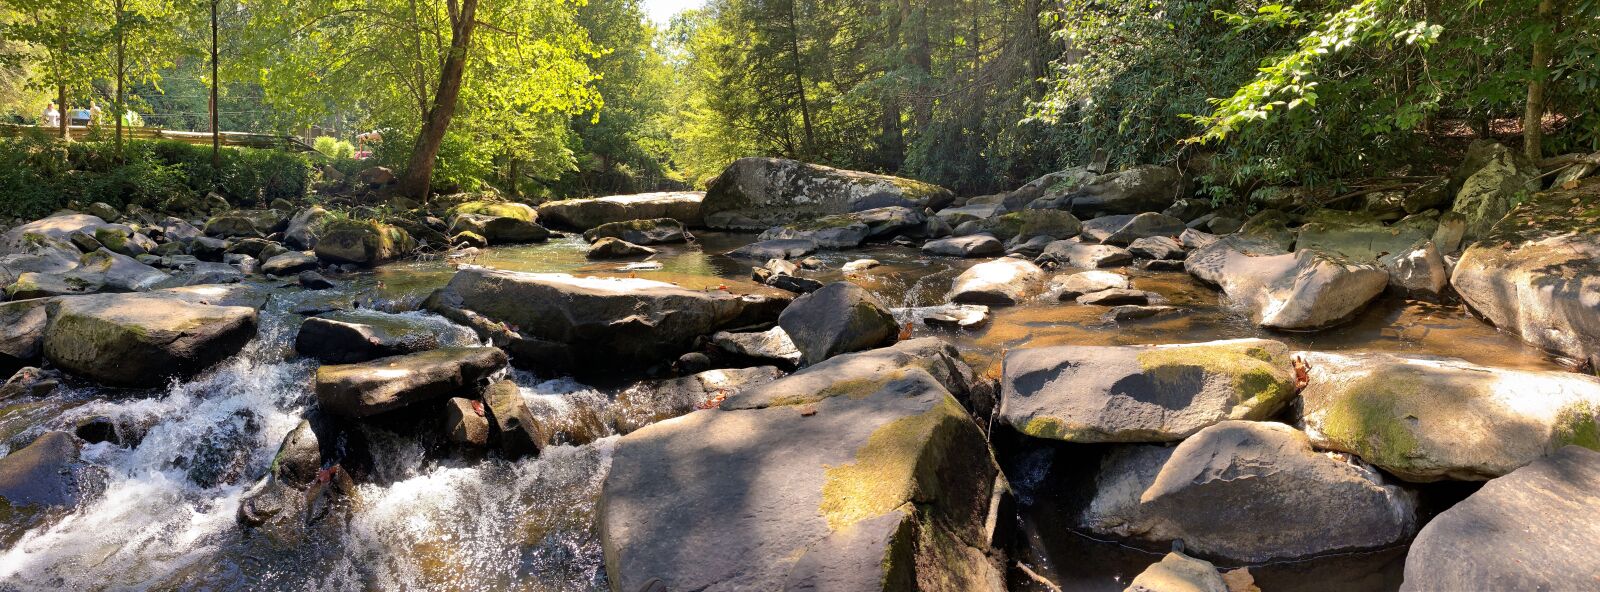 Apple iPhone XS Max + iPhone XS Max back camera 4.25mm f/1.8 sample photo. Paint creek, west virginia photography